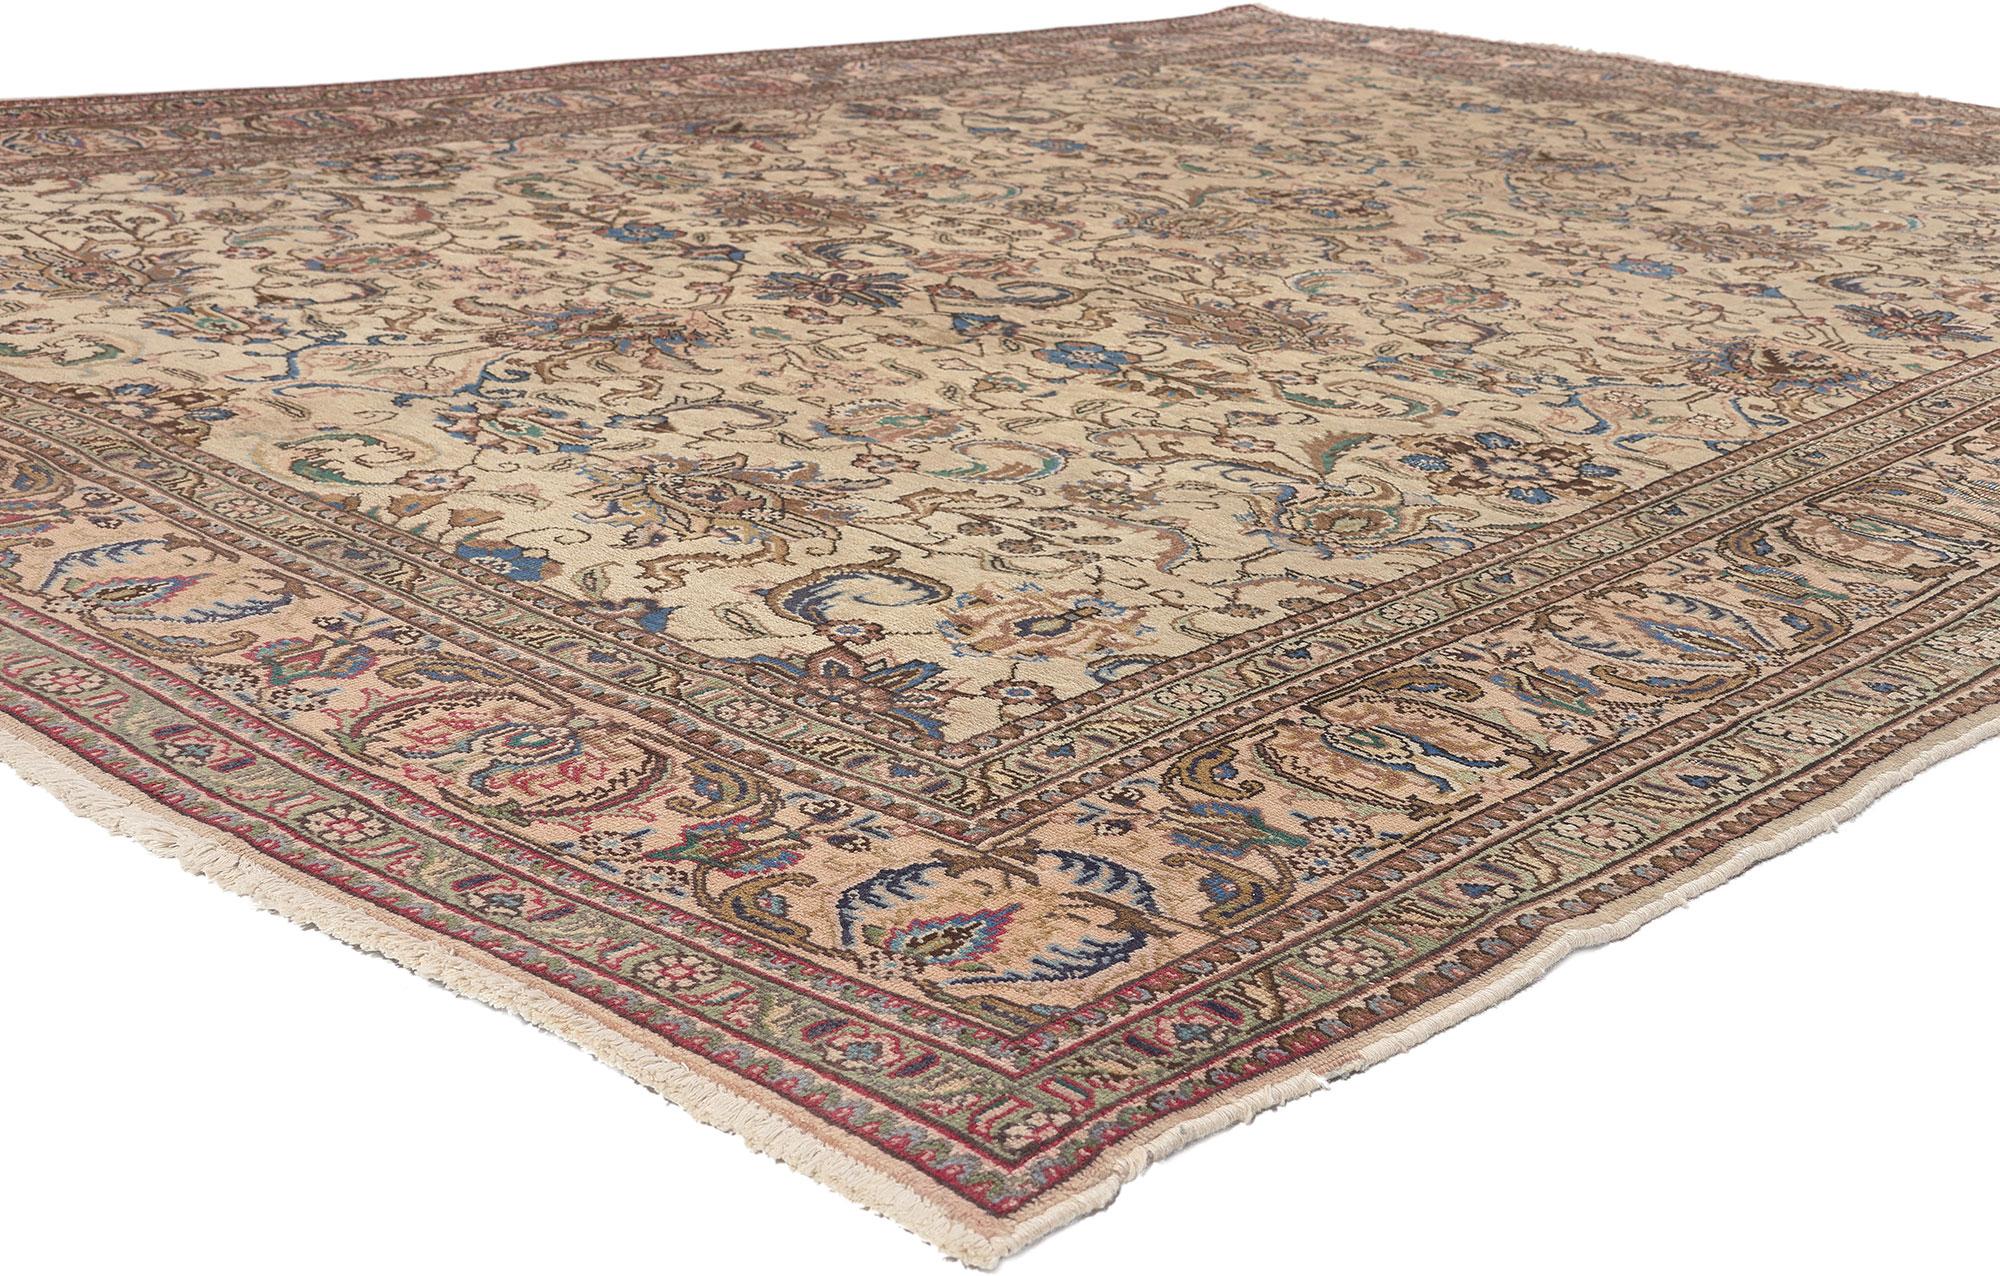 75093 Vintage Persian Tabriz Rug, 08'04 x 11'07.
French sophistication meets Neoclassic style in this hand knotted wool vintage Persian Tabriz rug. The naturalistic botanical design and light color palette woven into this piece work together